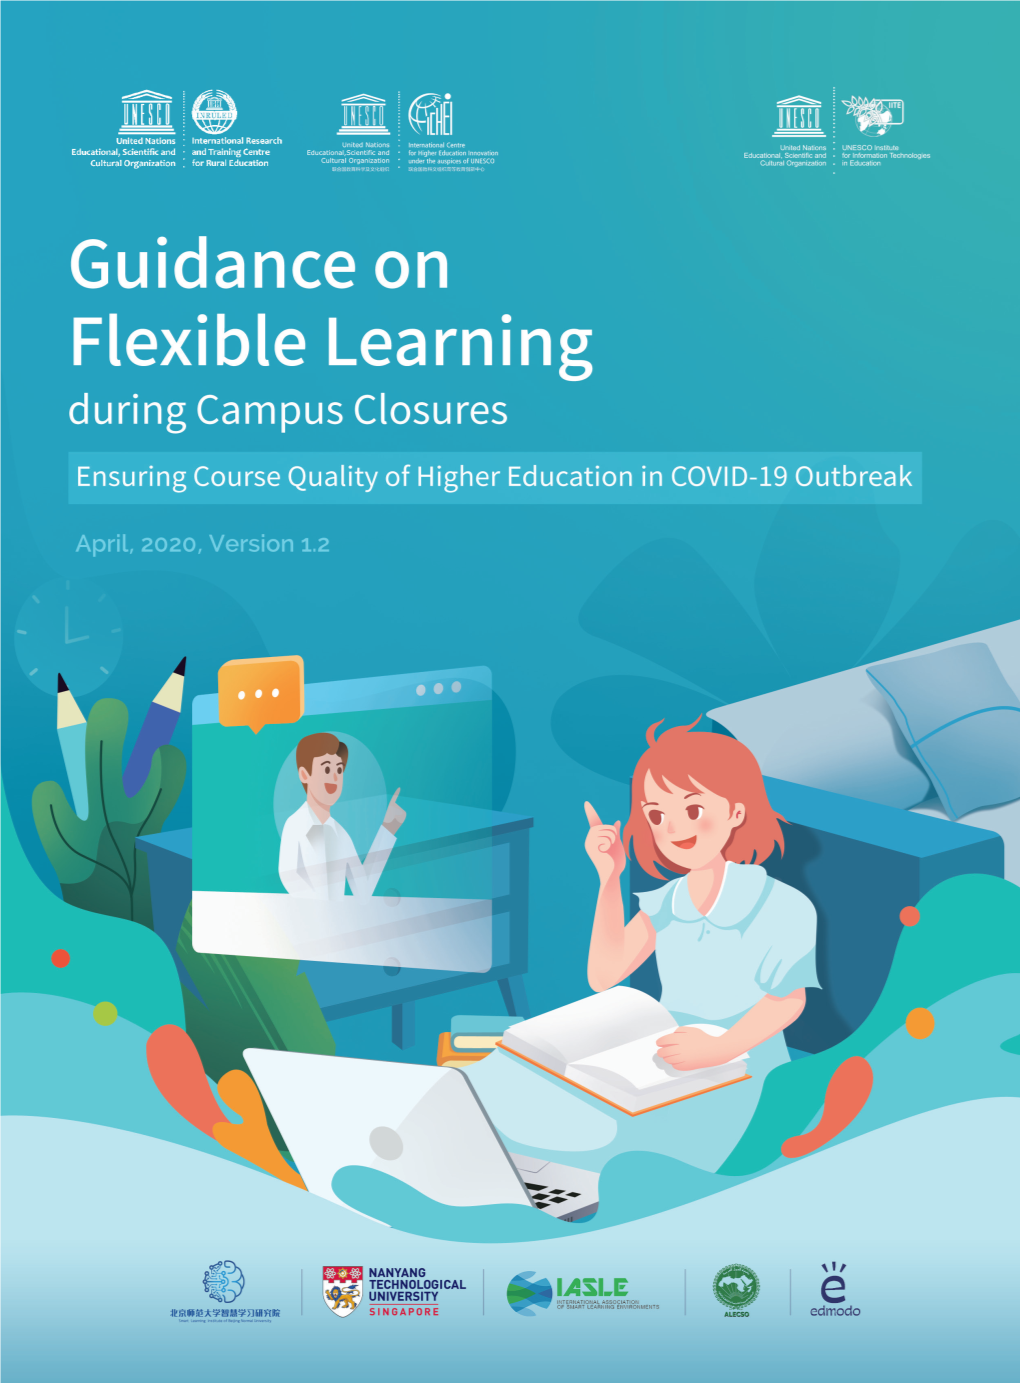 Guidance on Flexible Learning During Campus Closures